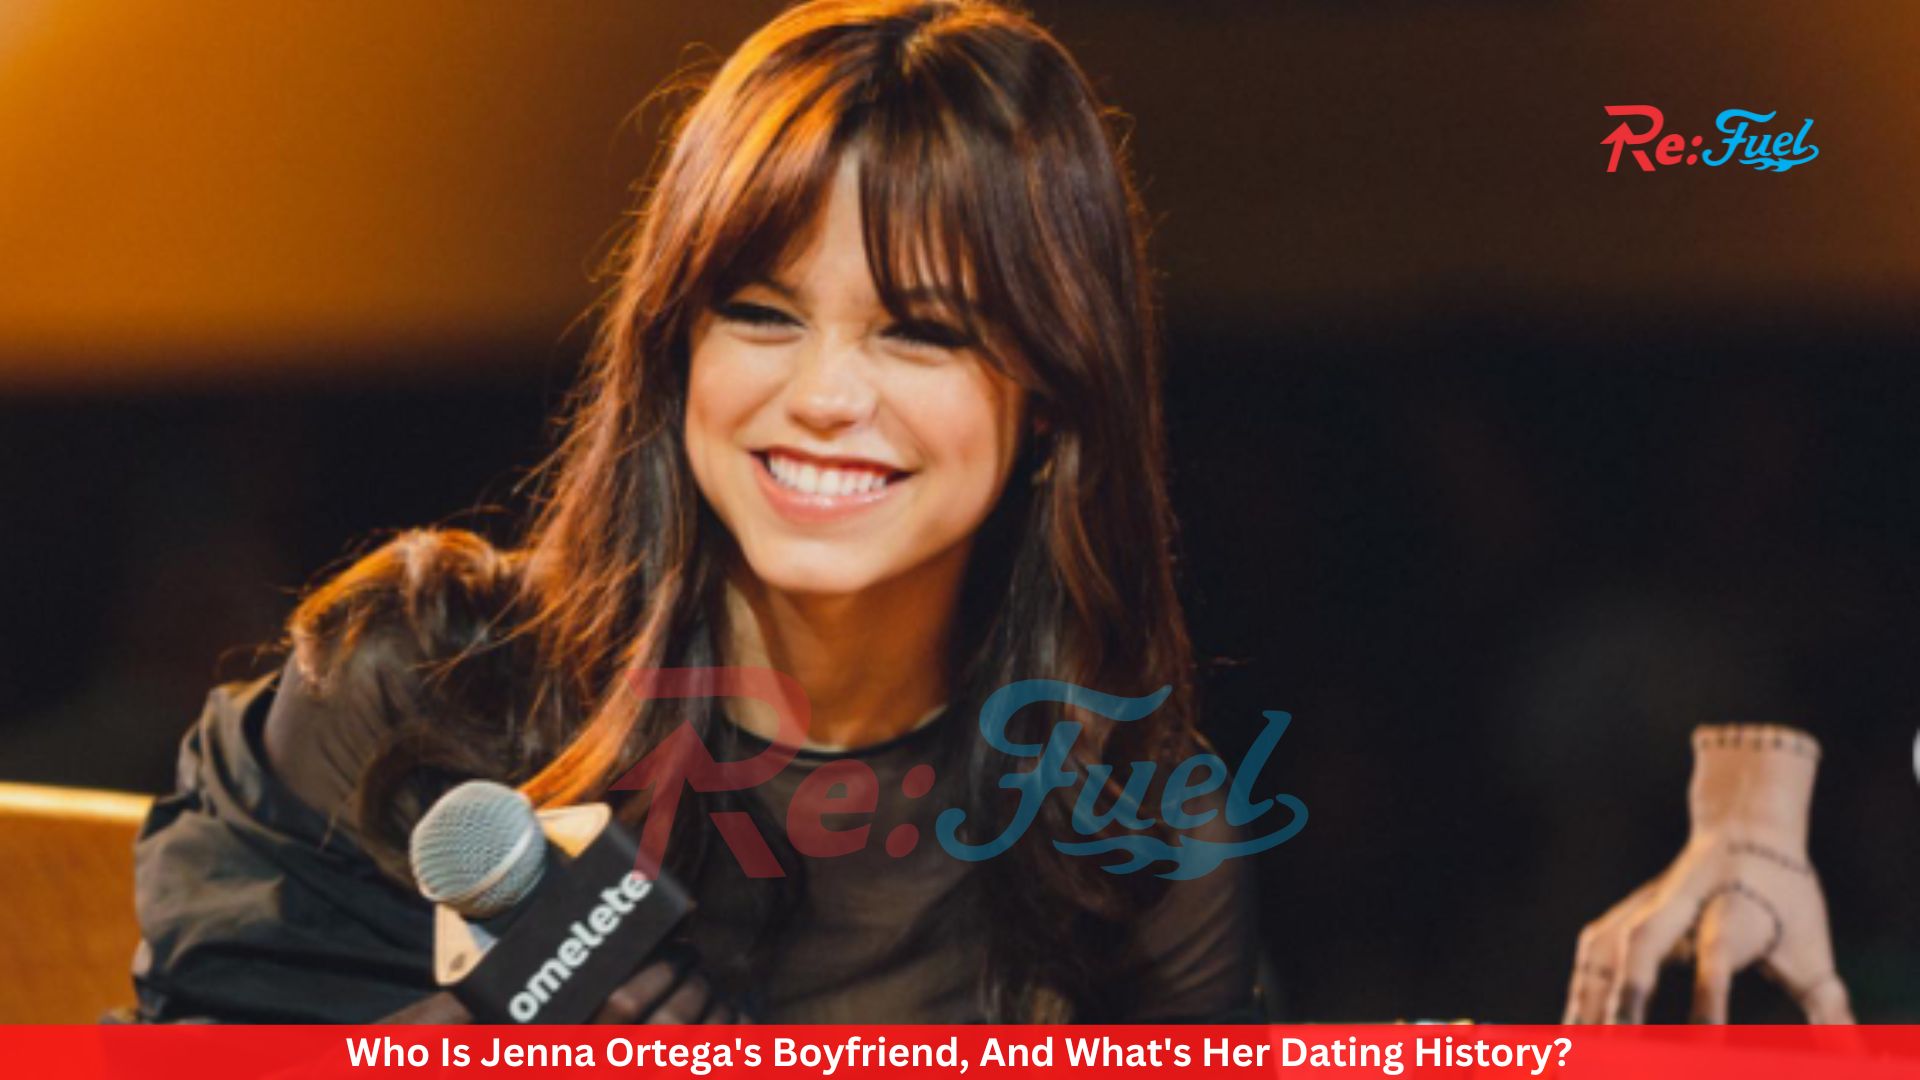 Who Is Jenna Ortega's Boyfriend, And What's Her Dating History?